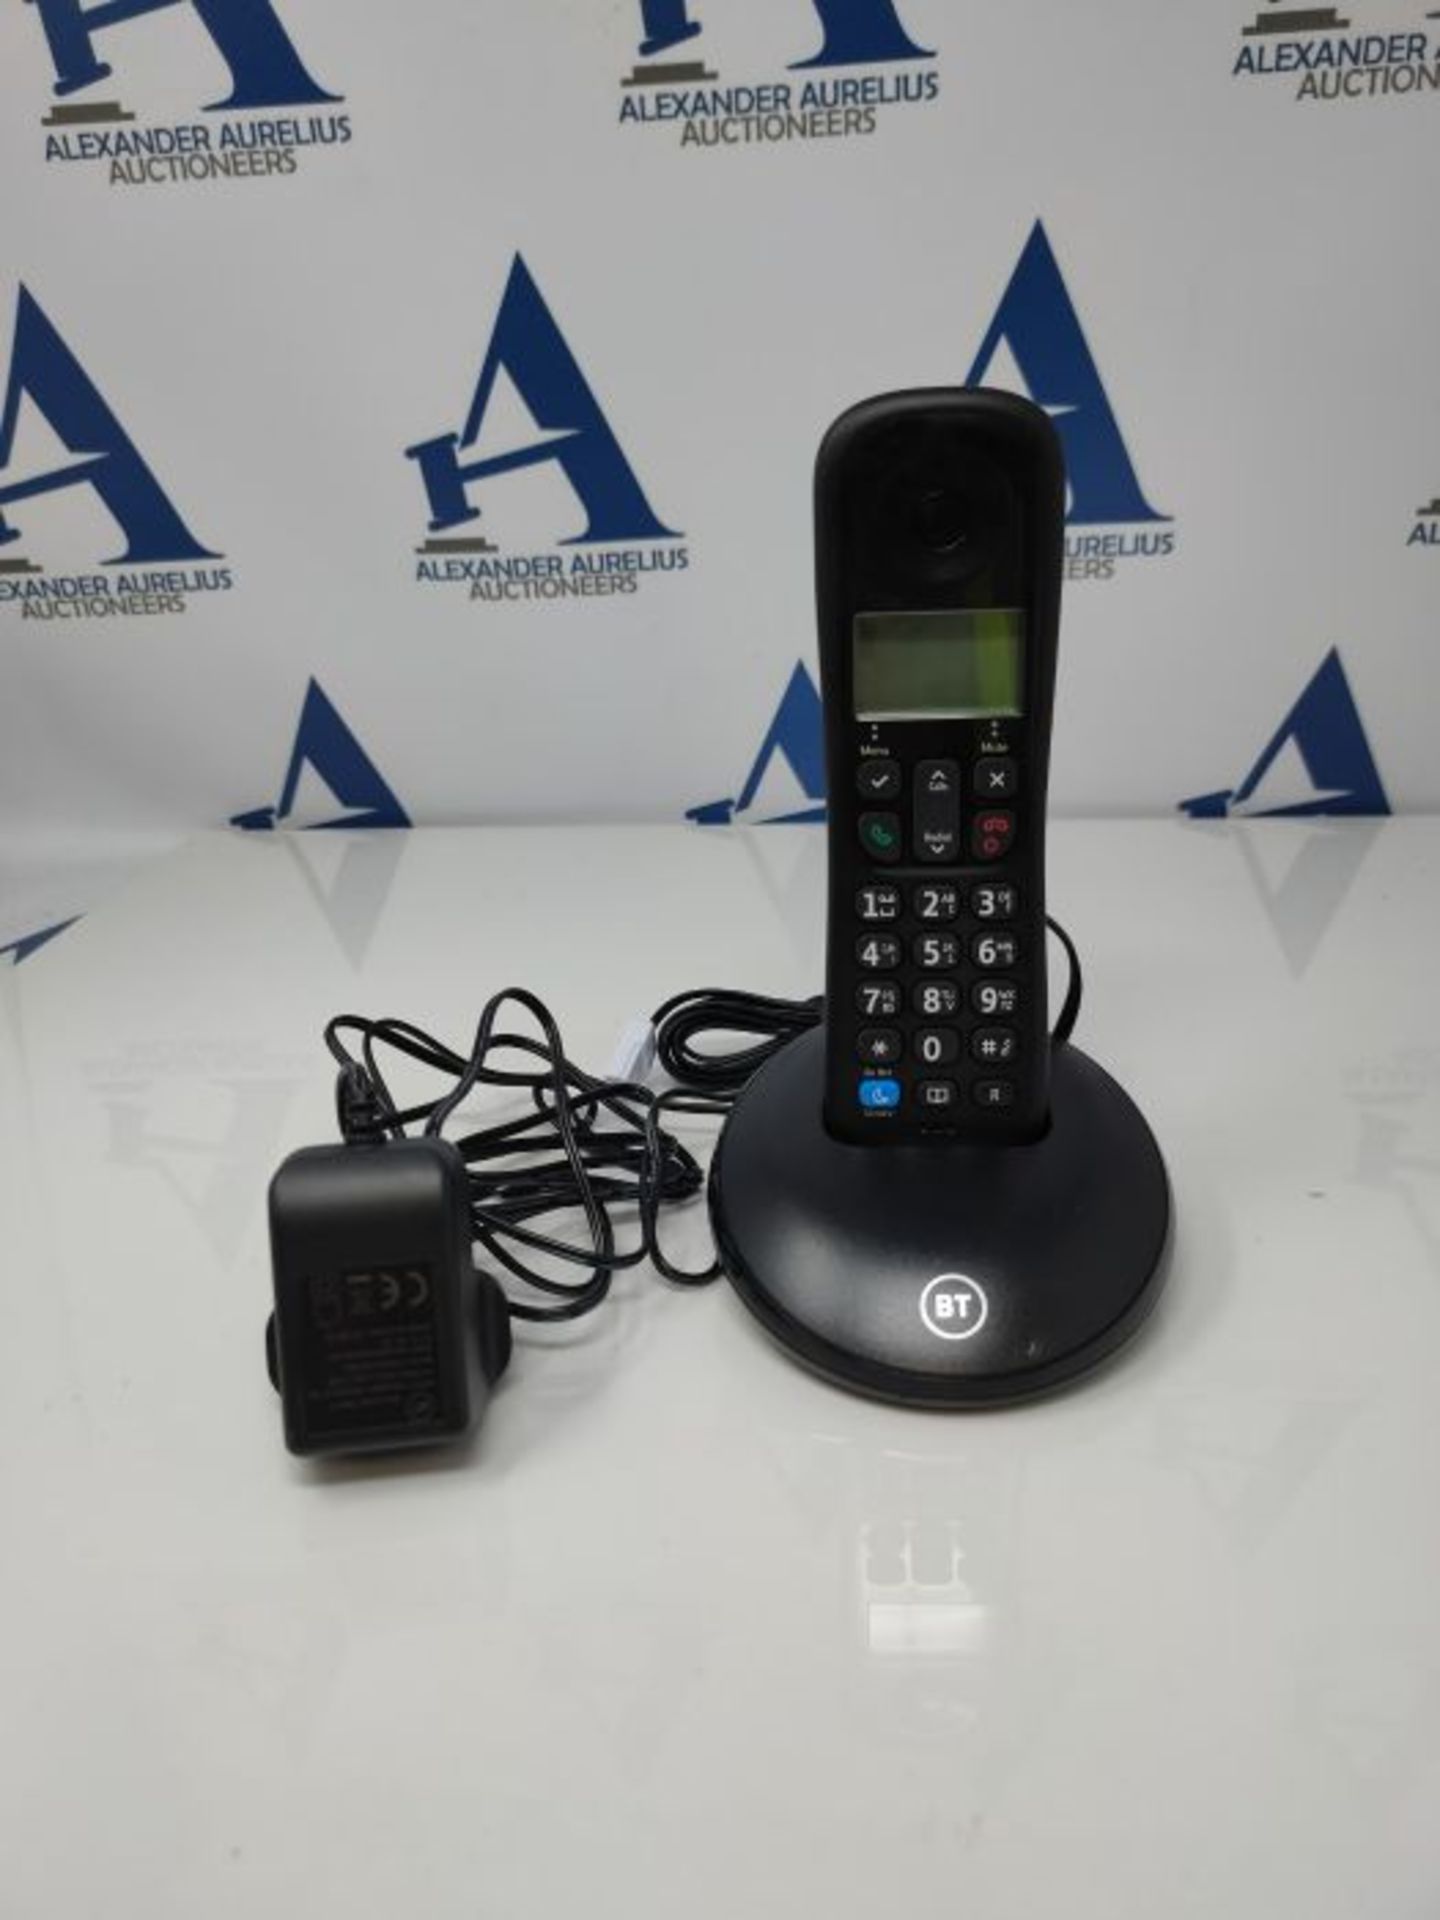 BT Everyday Cordless Home Phone with Basic Call Blocking, Single Handset Pack - Image 2 of 3